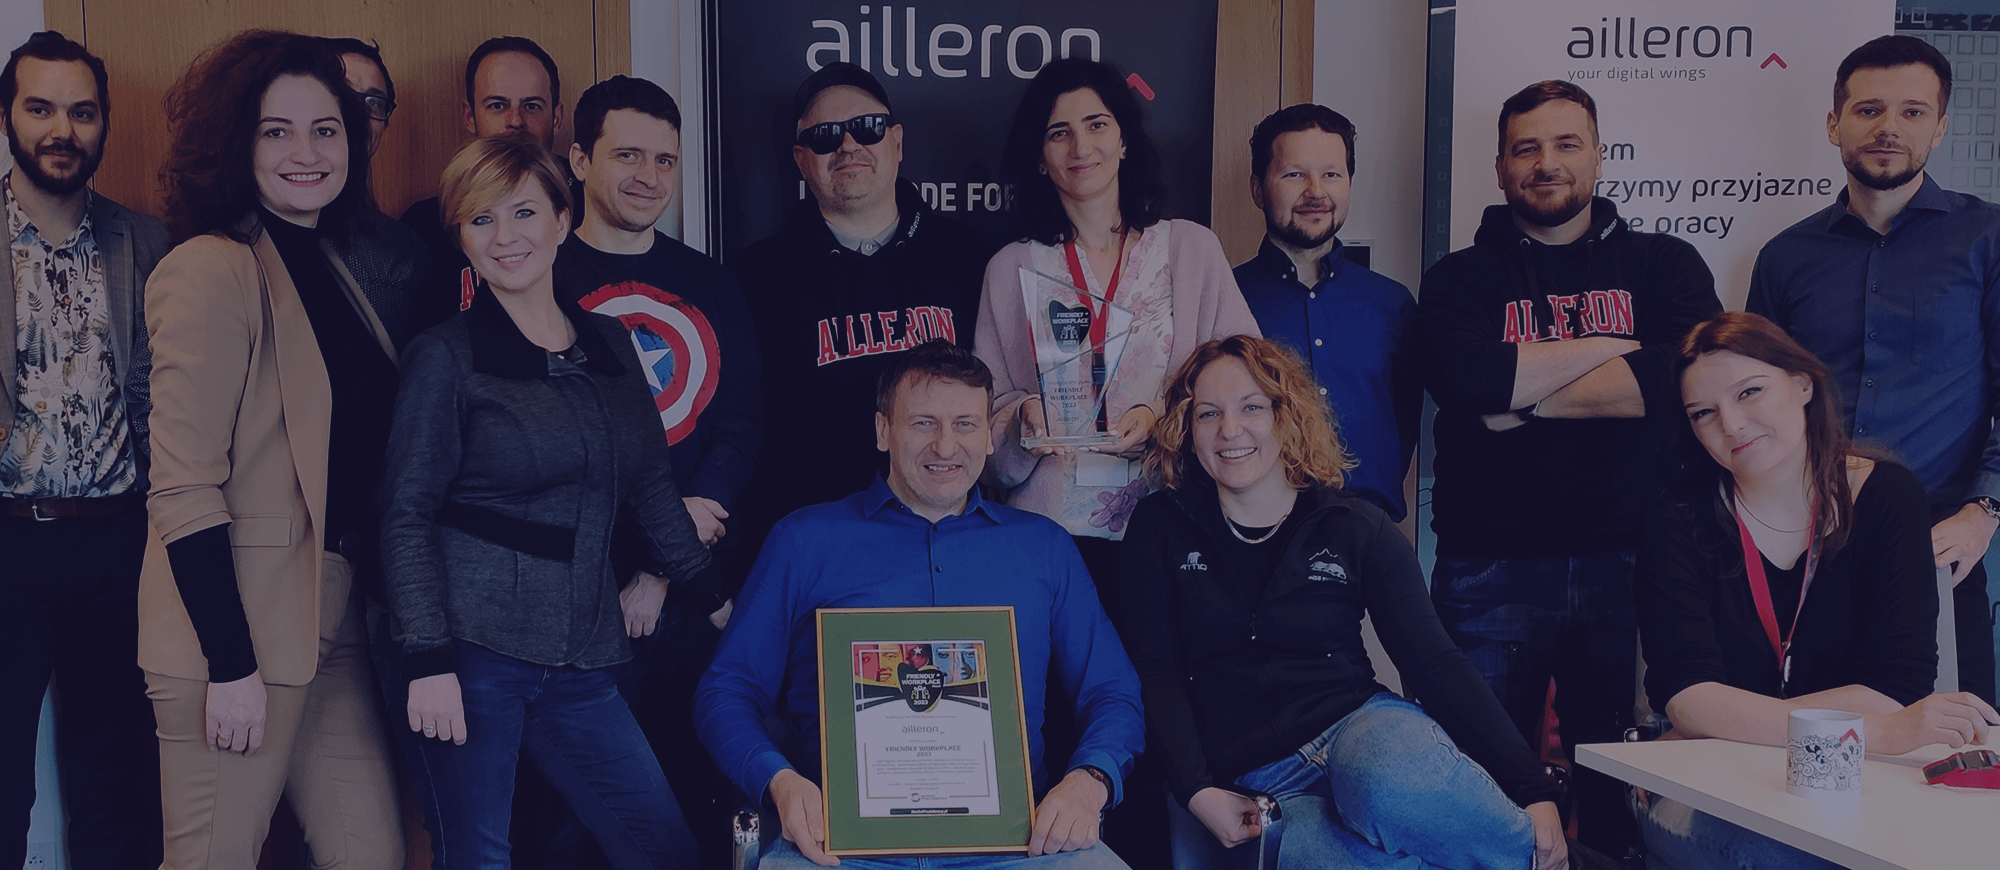 Ailleron with Friendly Workplace award!